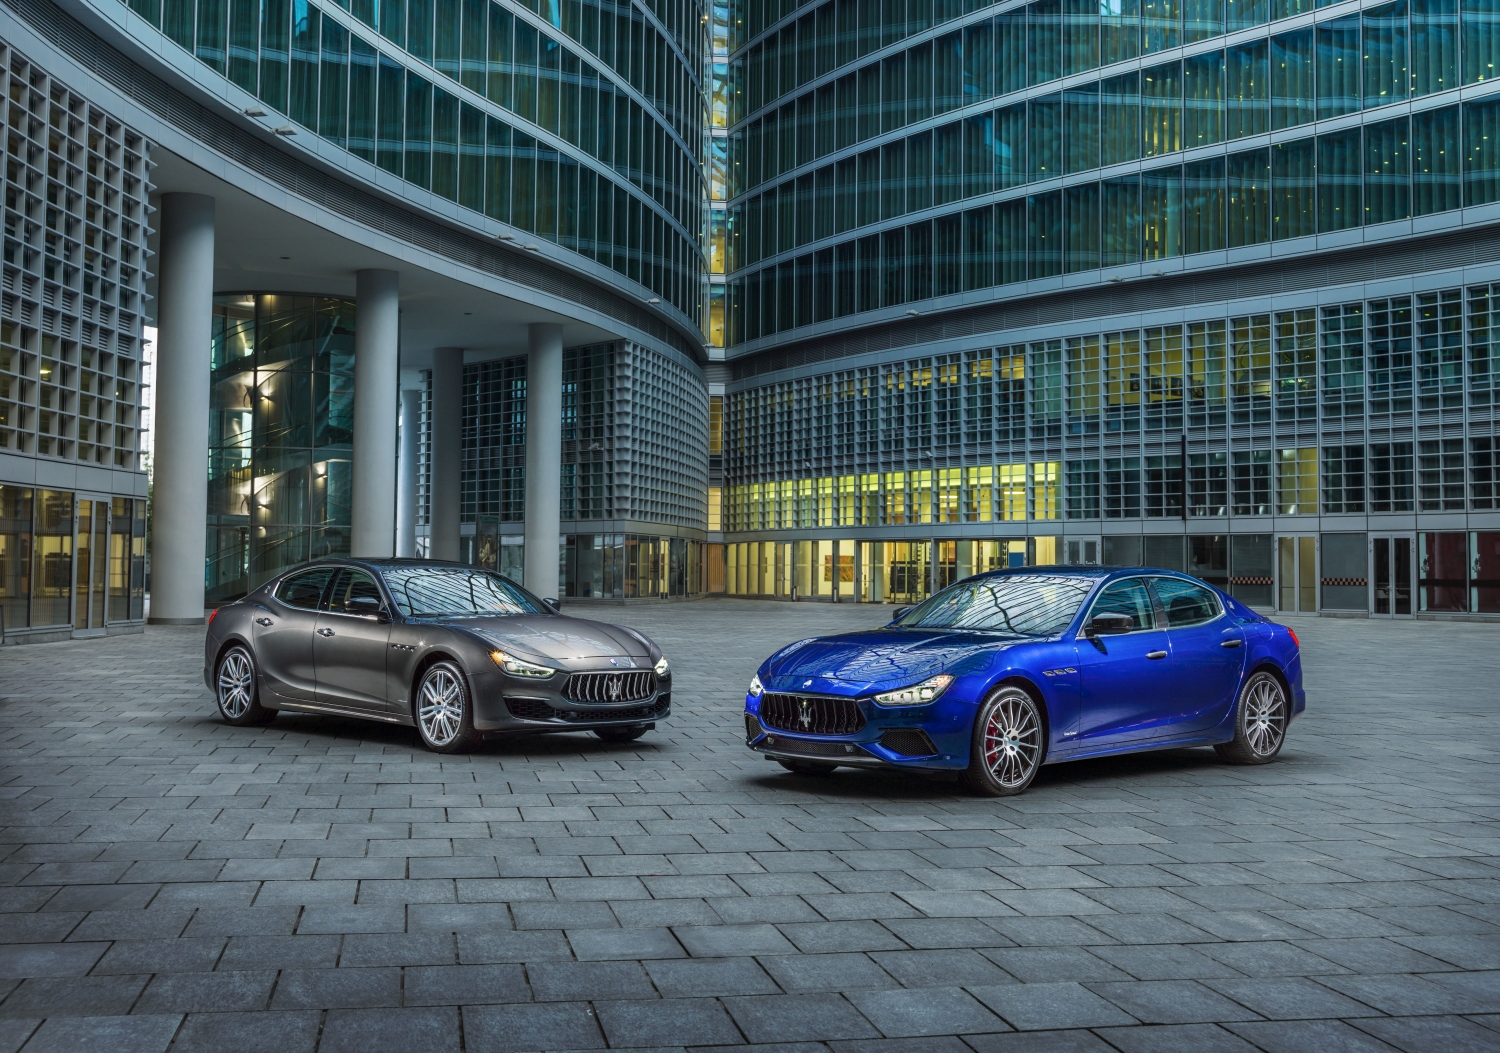 Maserati reveals the new Ghibli GranLusso and GranSport at Chengdu Motor Show 2017